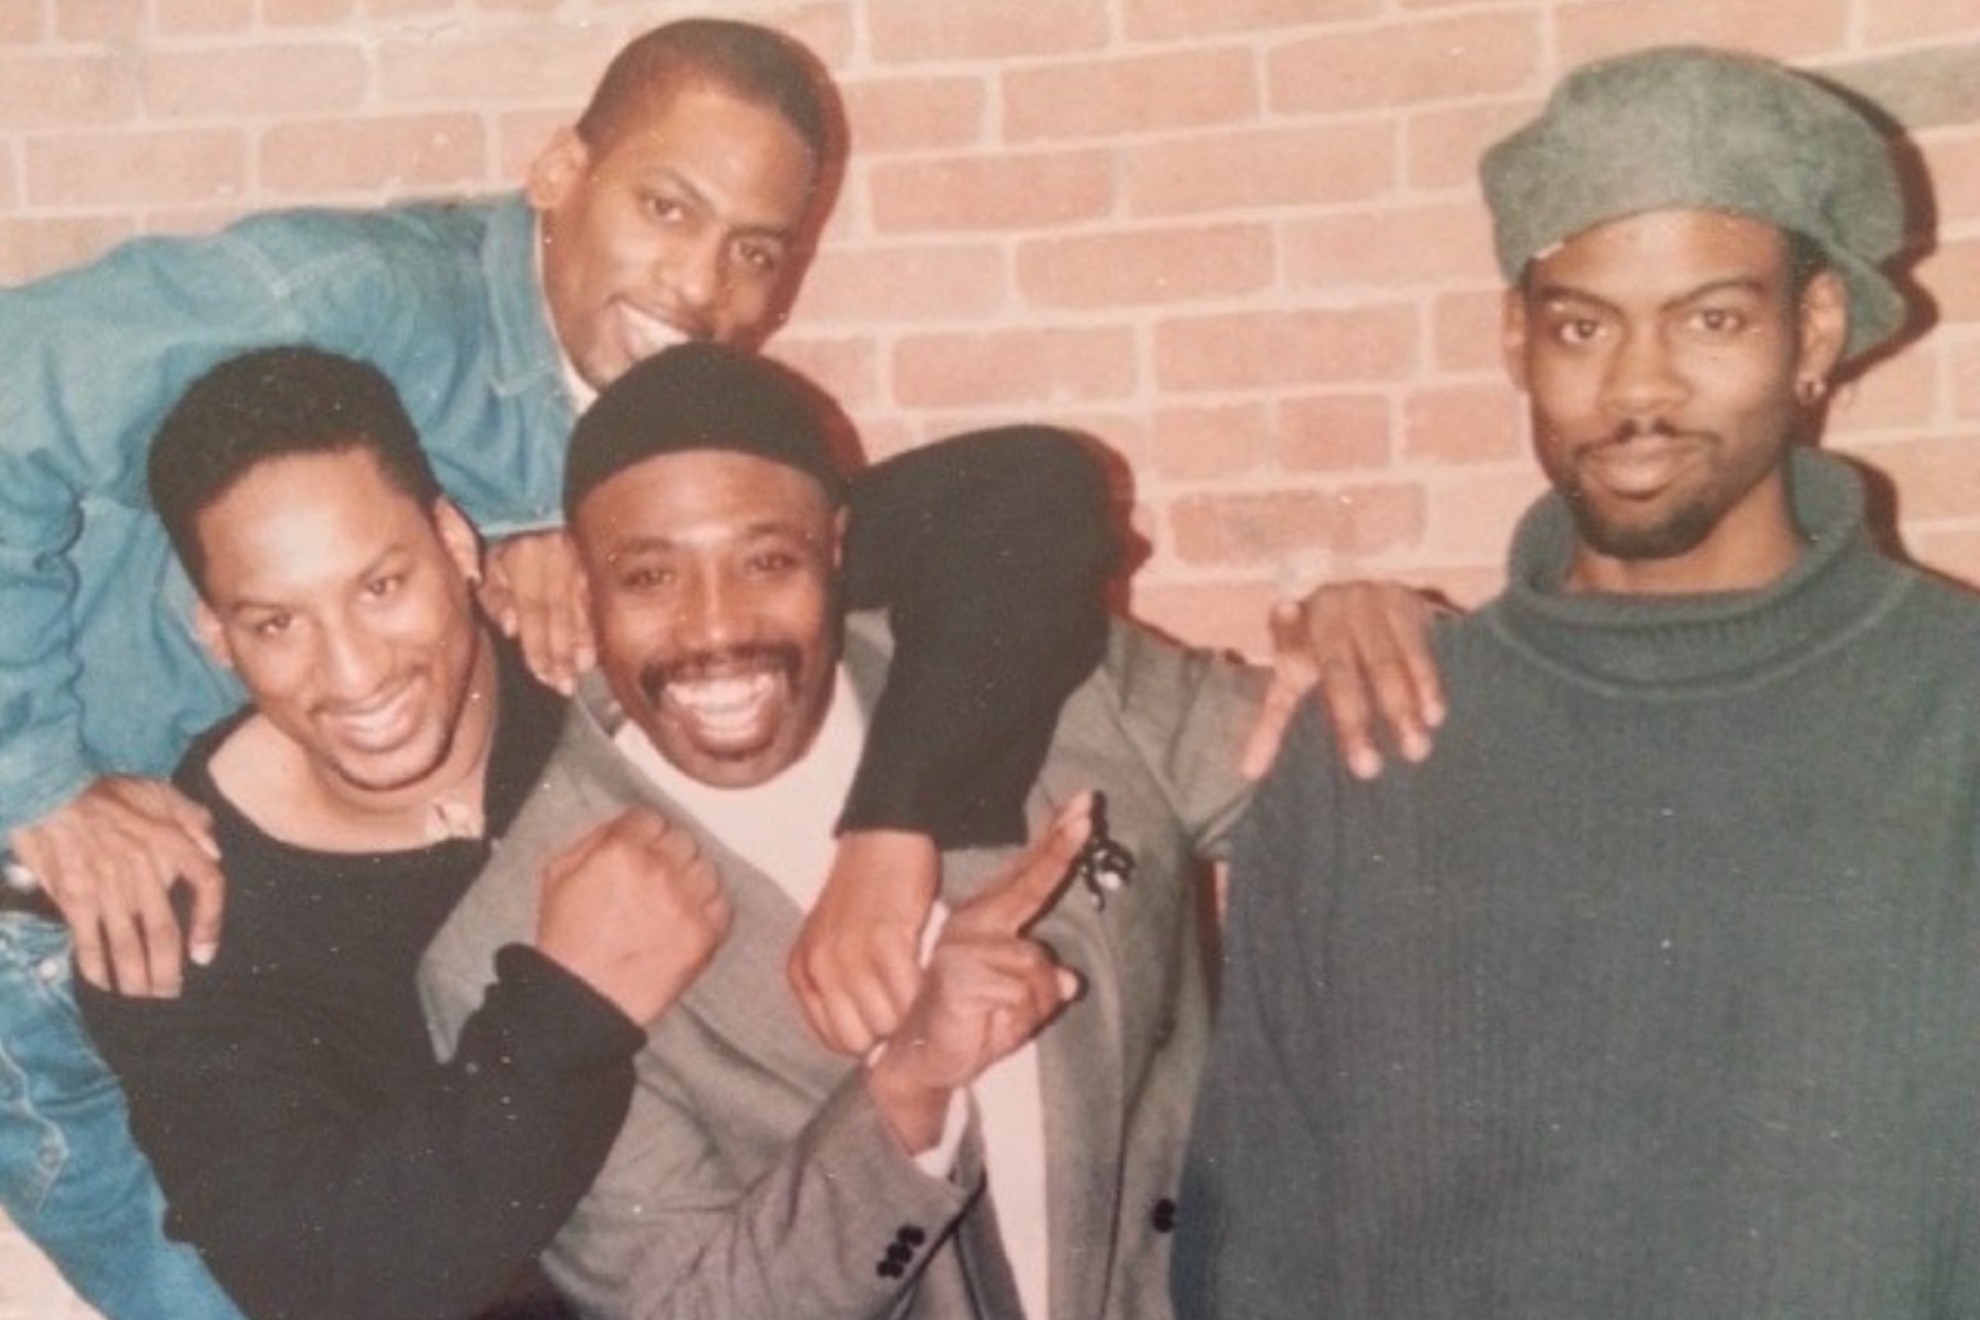 A rare '1990s image of Chris Rock, Tony Rock and the rest of their siblings.